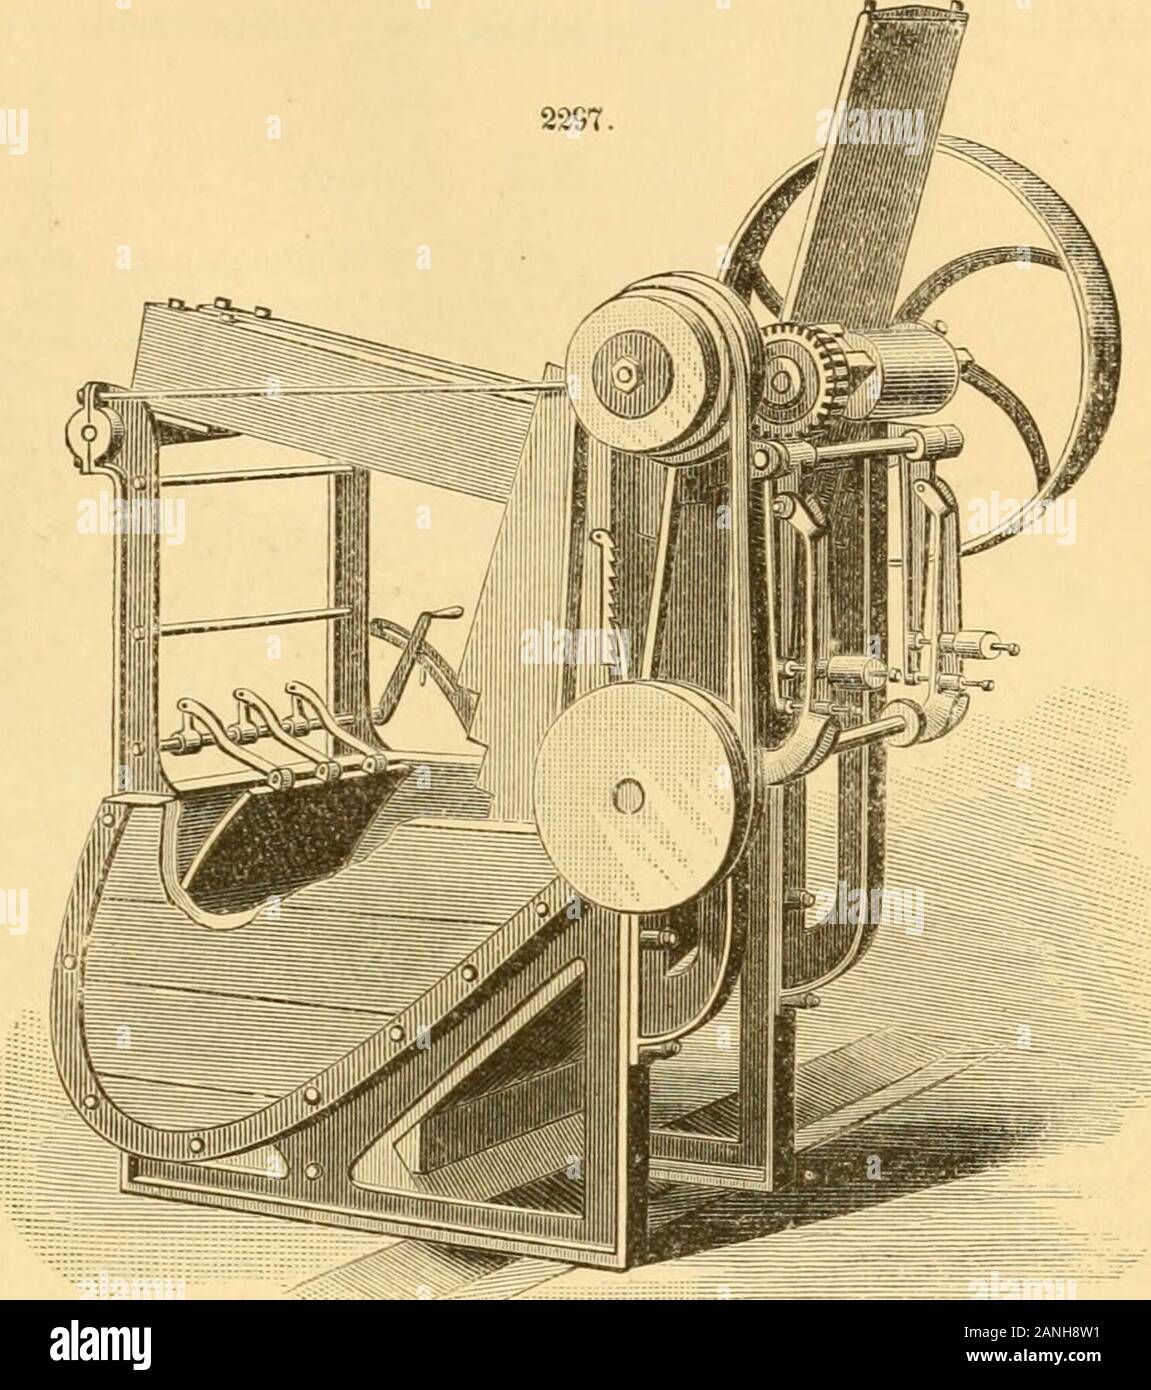 Appletons' cyclopaedia of applied mechanics: a dictionary of mechanical engineering and the mechanical arts . ine. A machine adapted to this secondsizing has been devised by Mr. J.Yero of Dewsbury, England, andimproved by Kirk, Shelmerdine, andFroygate, of Stockport, England.The improved apparatus has fourrollers driven all in the same direc-tion by gearing. The lower pair ofrollers is journaled in the station-ary frame, while the upper pair isjournaled in a swinging frame, whichcan be lifted up whenever the hat-roll is to be inserted or removed.The working surface of the rollersis formed of e Stock Photo